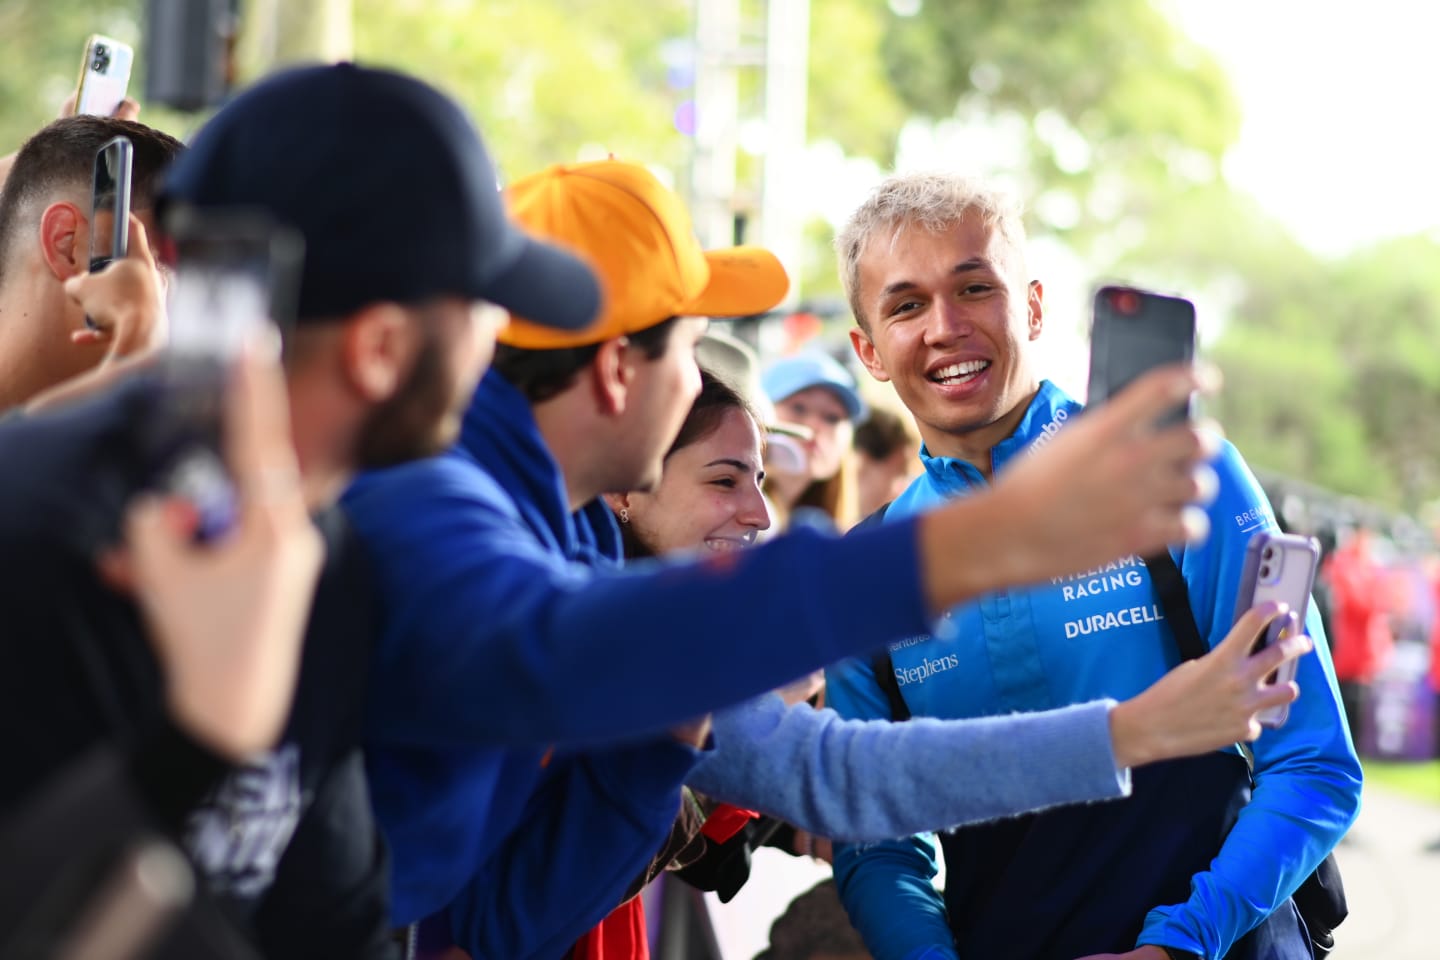 MELBOURNE, AUSTRALIA - MARCH 31: Alexander Albon of Thailand and Williams greets fans on the Melbourne Walk prior to practice ahead of the F1 Grand Prix of Australia at Albert Park Grand Prix Circuit on March 31, 2023 in Melbourne, Australia. (Photo by Quinn Rooney/Getty Images)